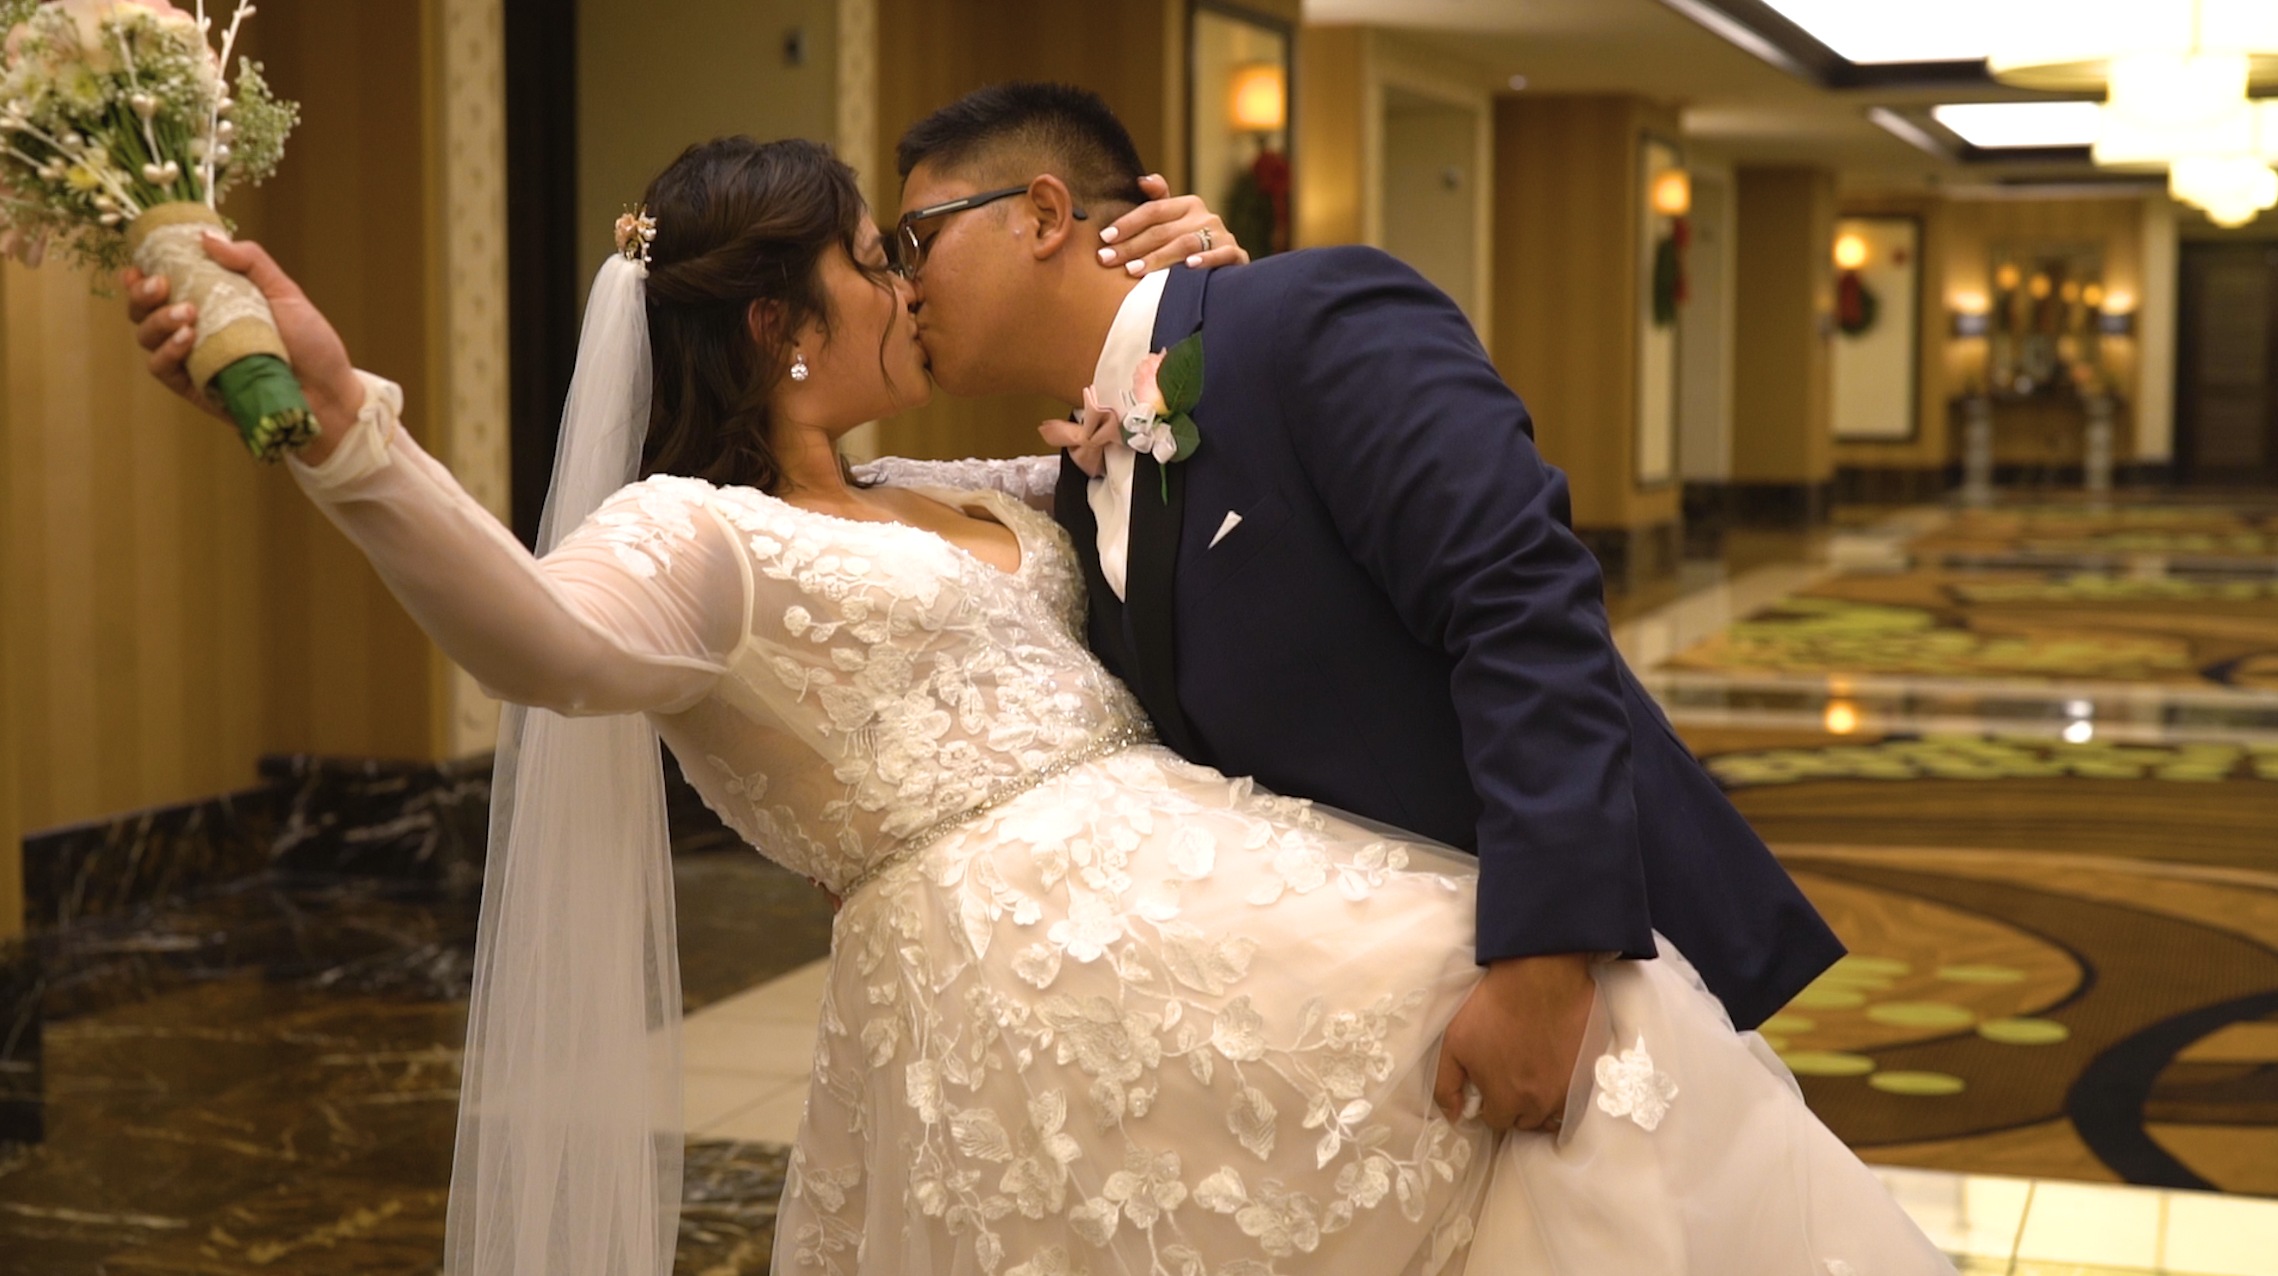 Couple kisses at their wedding